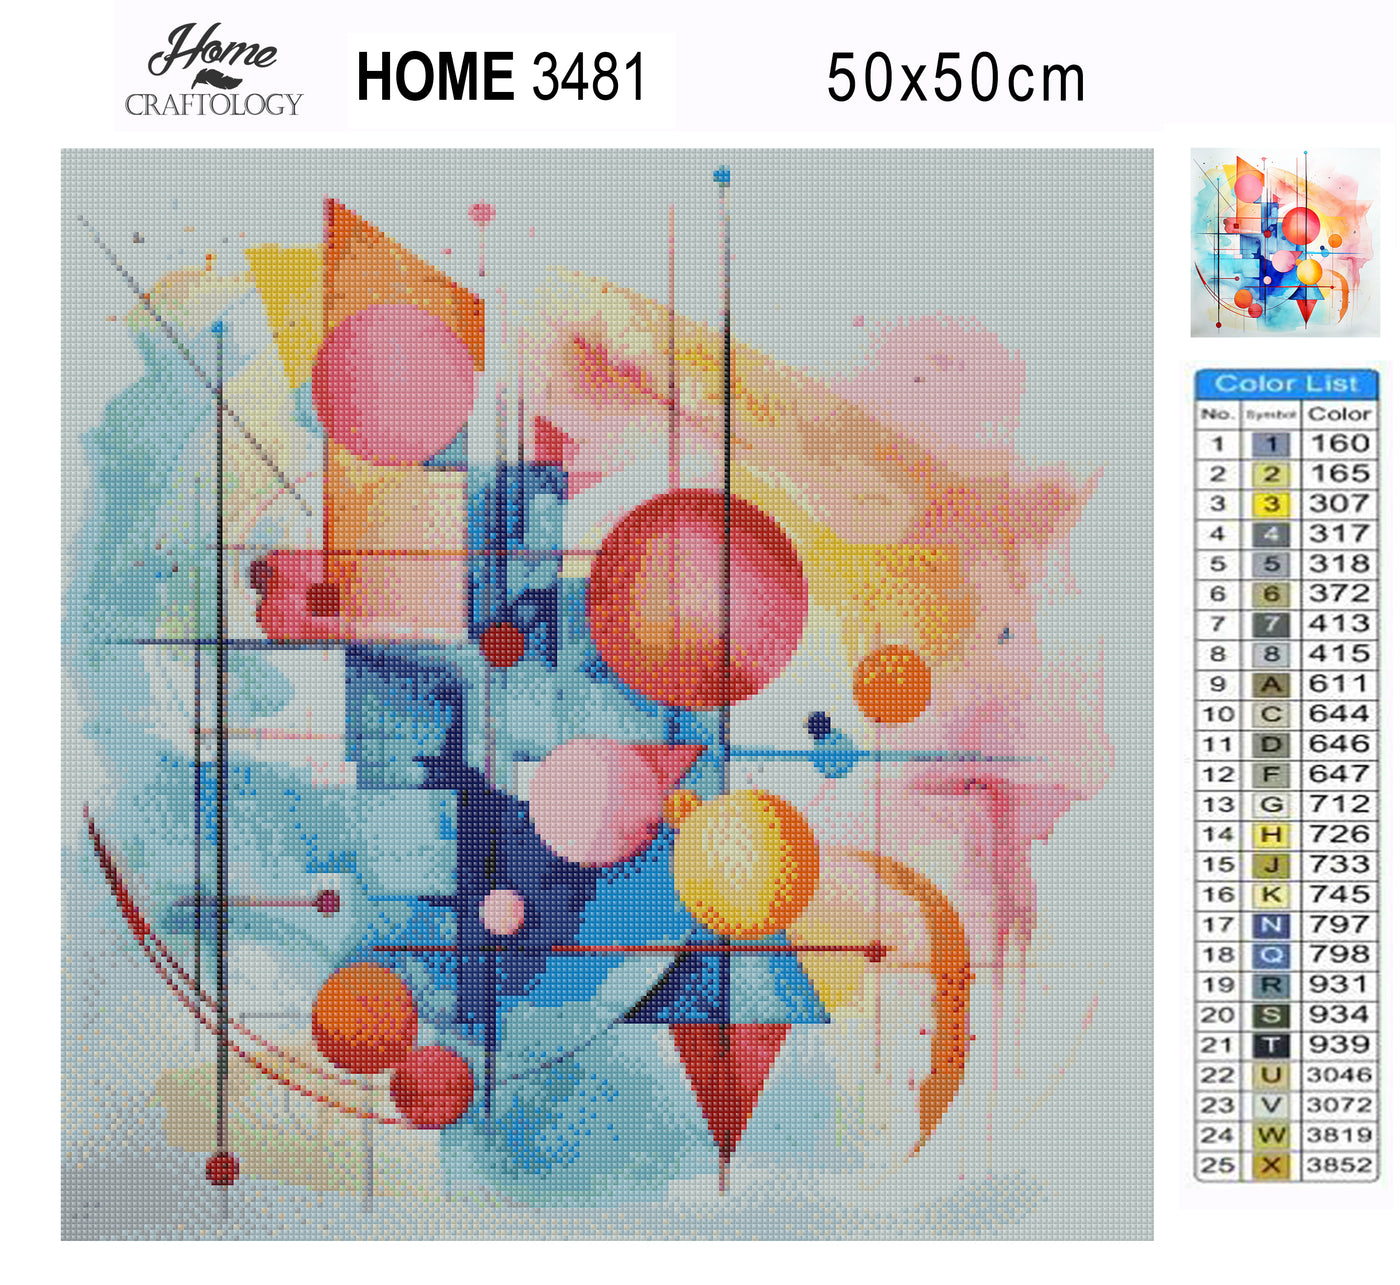 New! Lines and Shapes - Premium Diamond Painting Kit